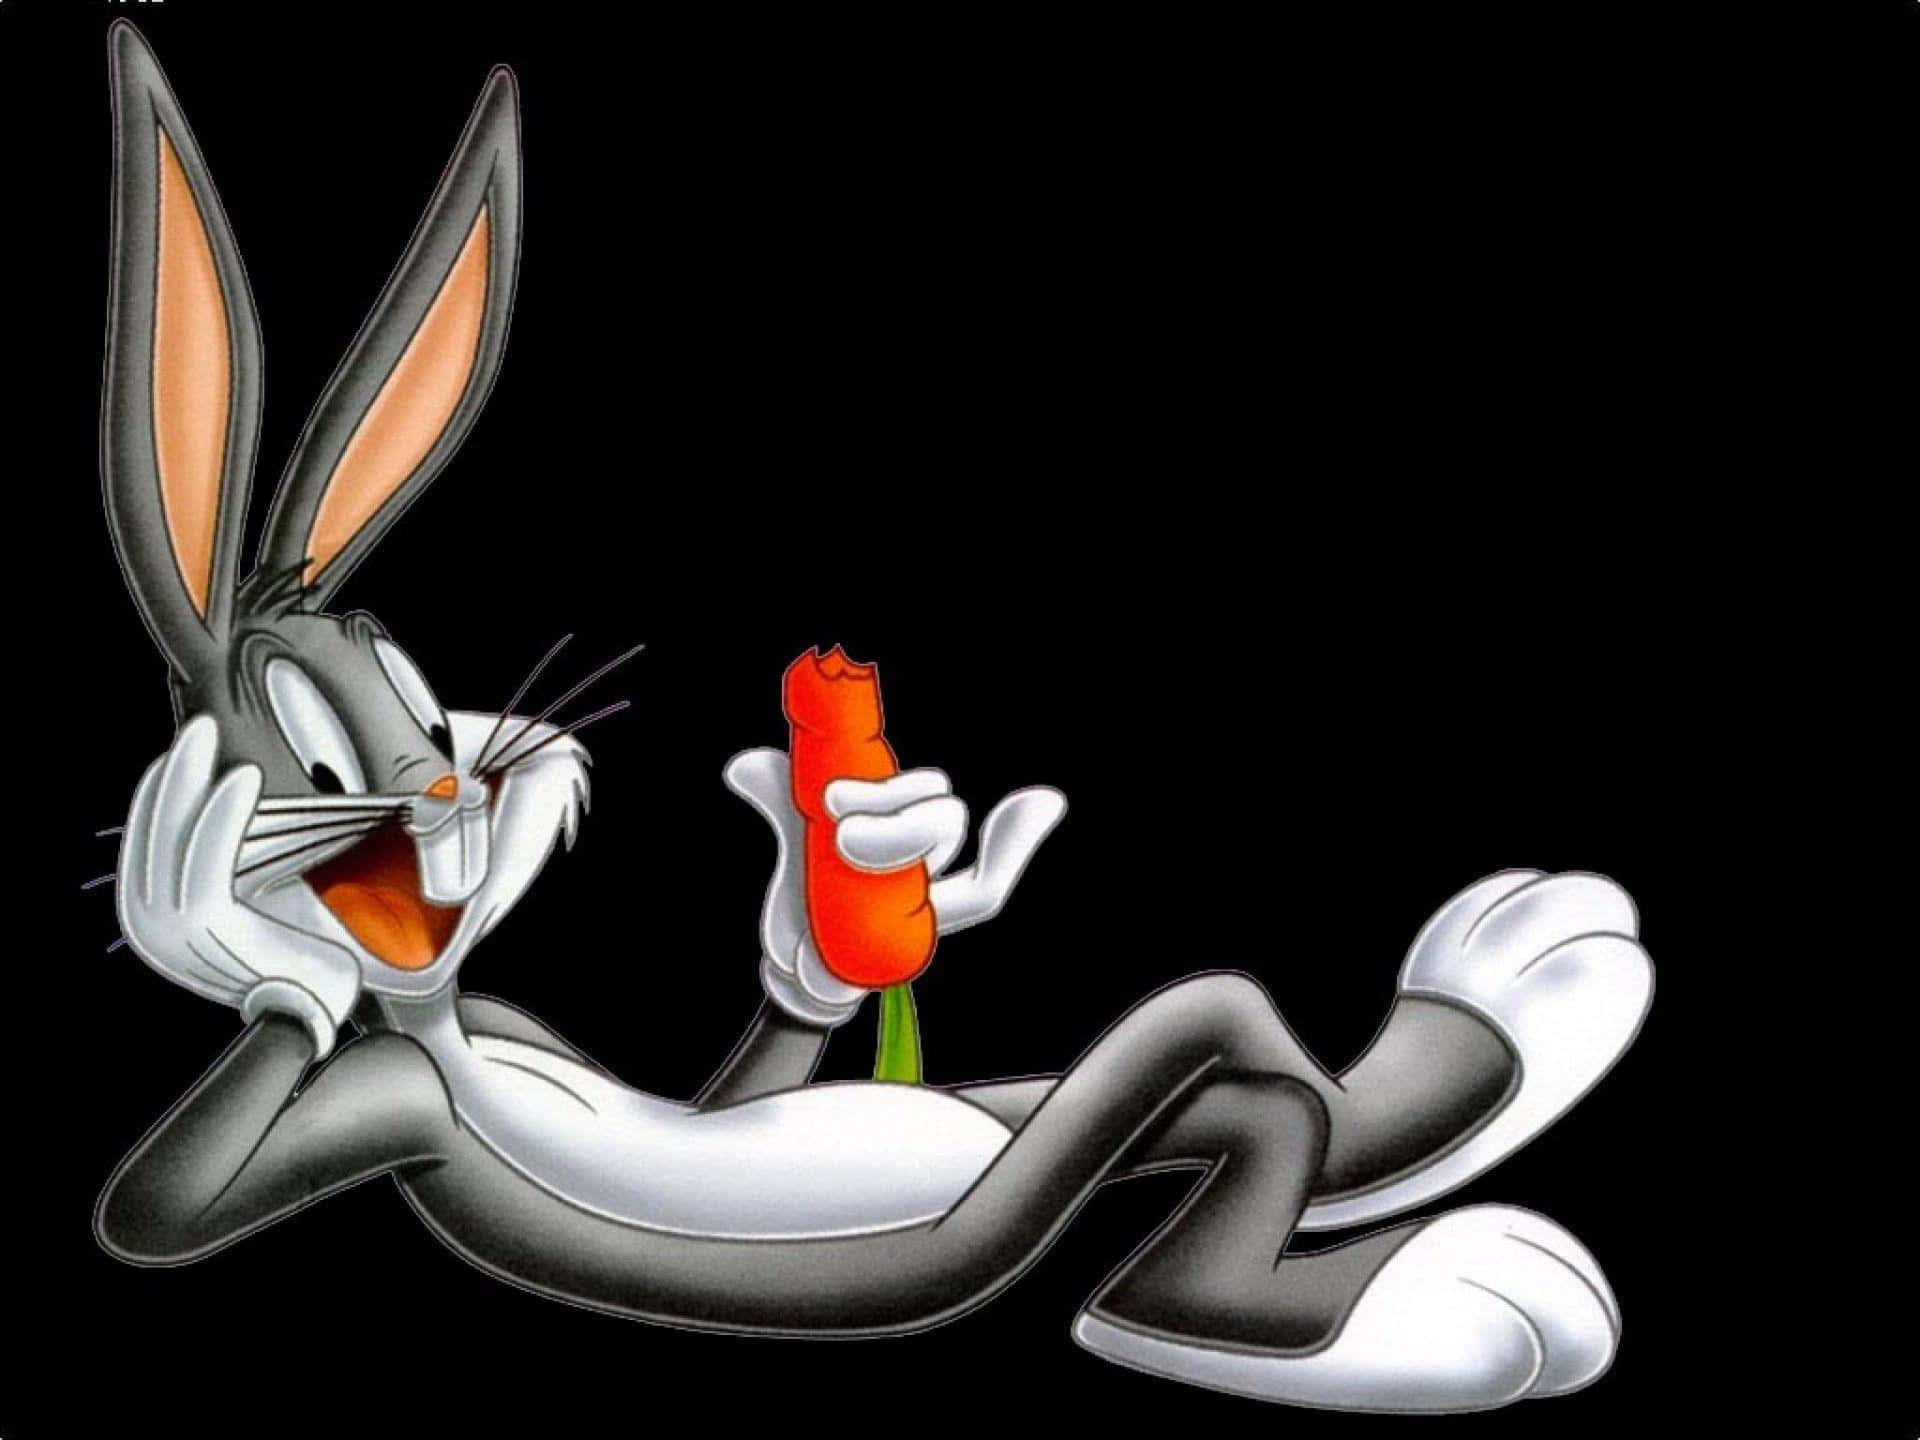 Bugs Bunny chilling out and enjoying nature